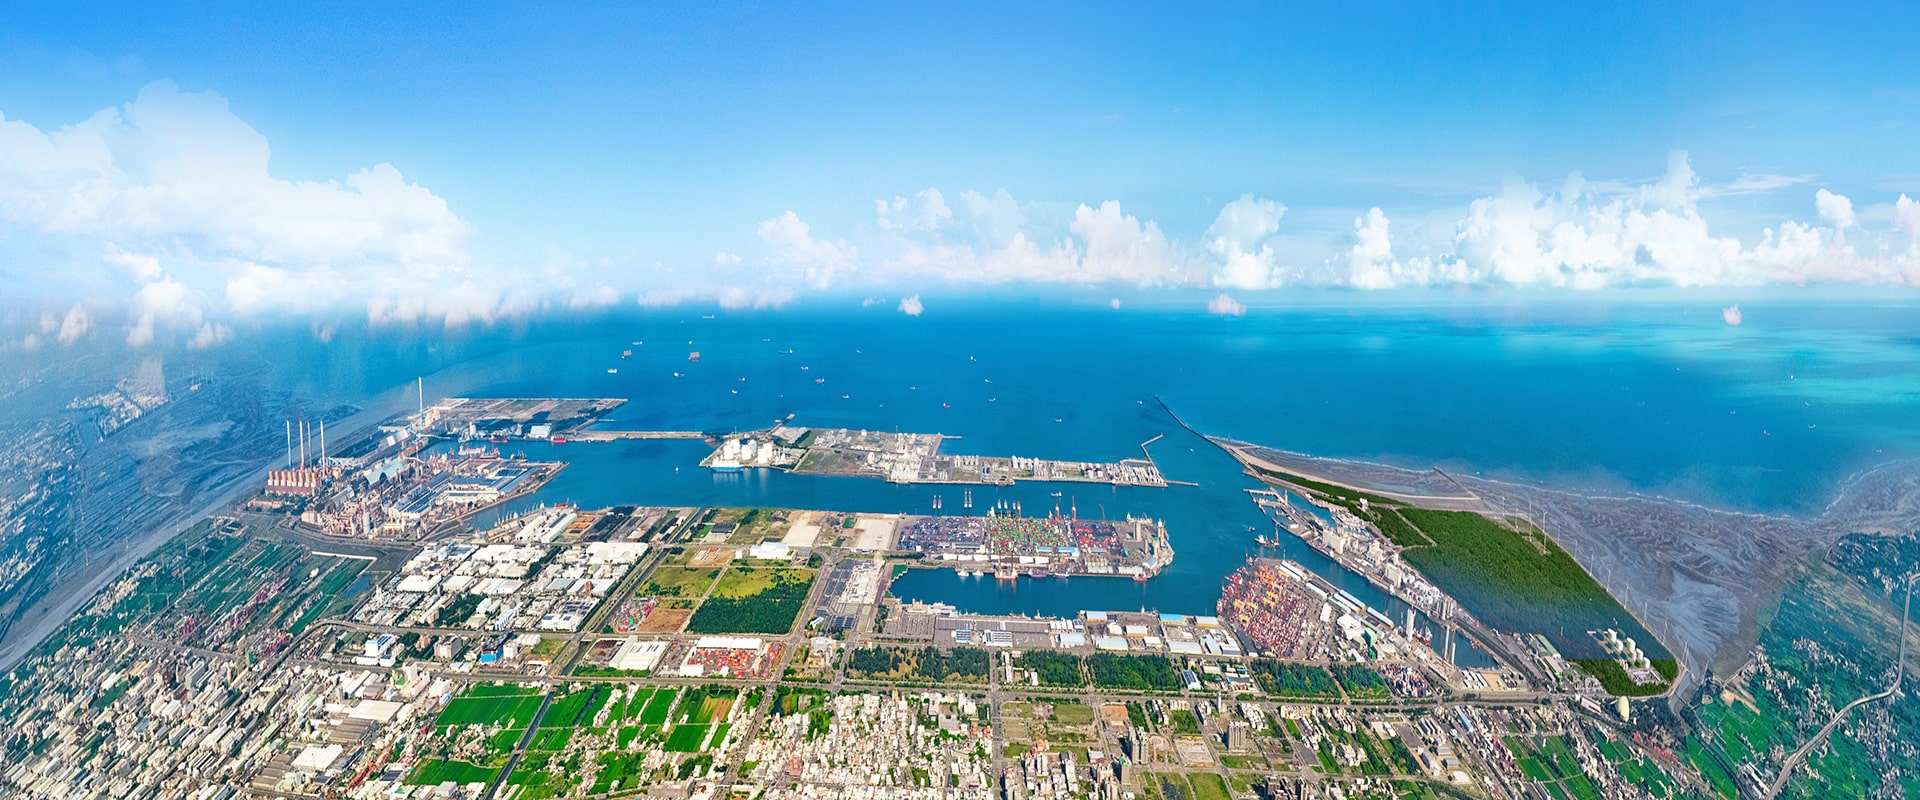 Taichung Port Aerial Photography